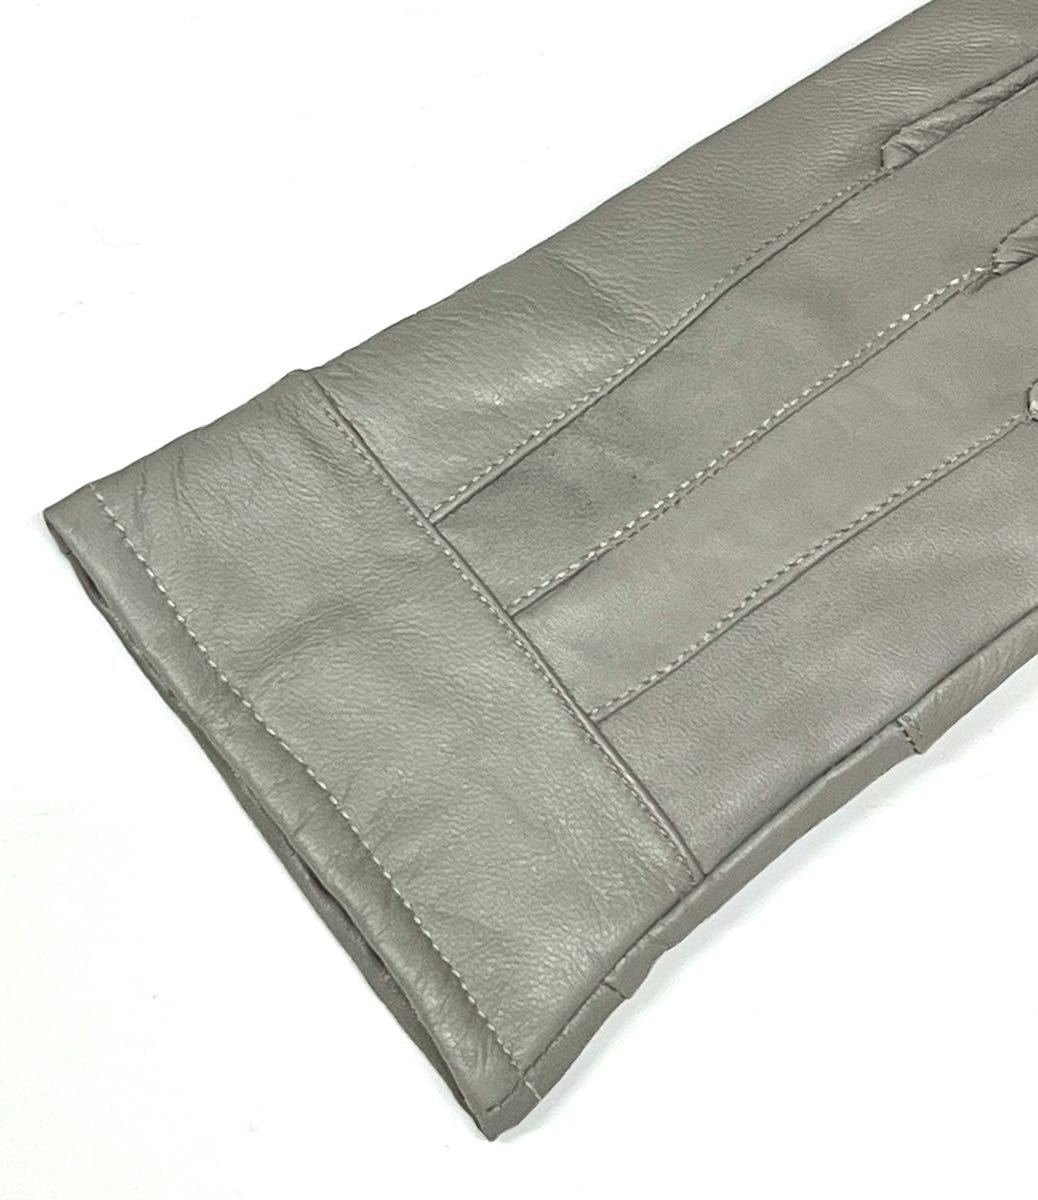  new goods * lady's leather gloves * ram leather glove reverse side nappy warm! original leather gray 